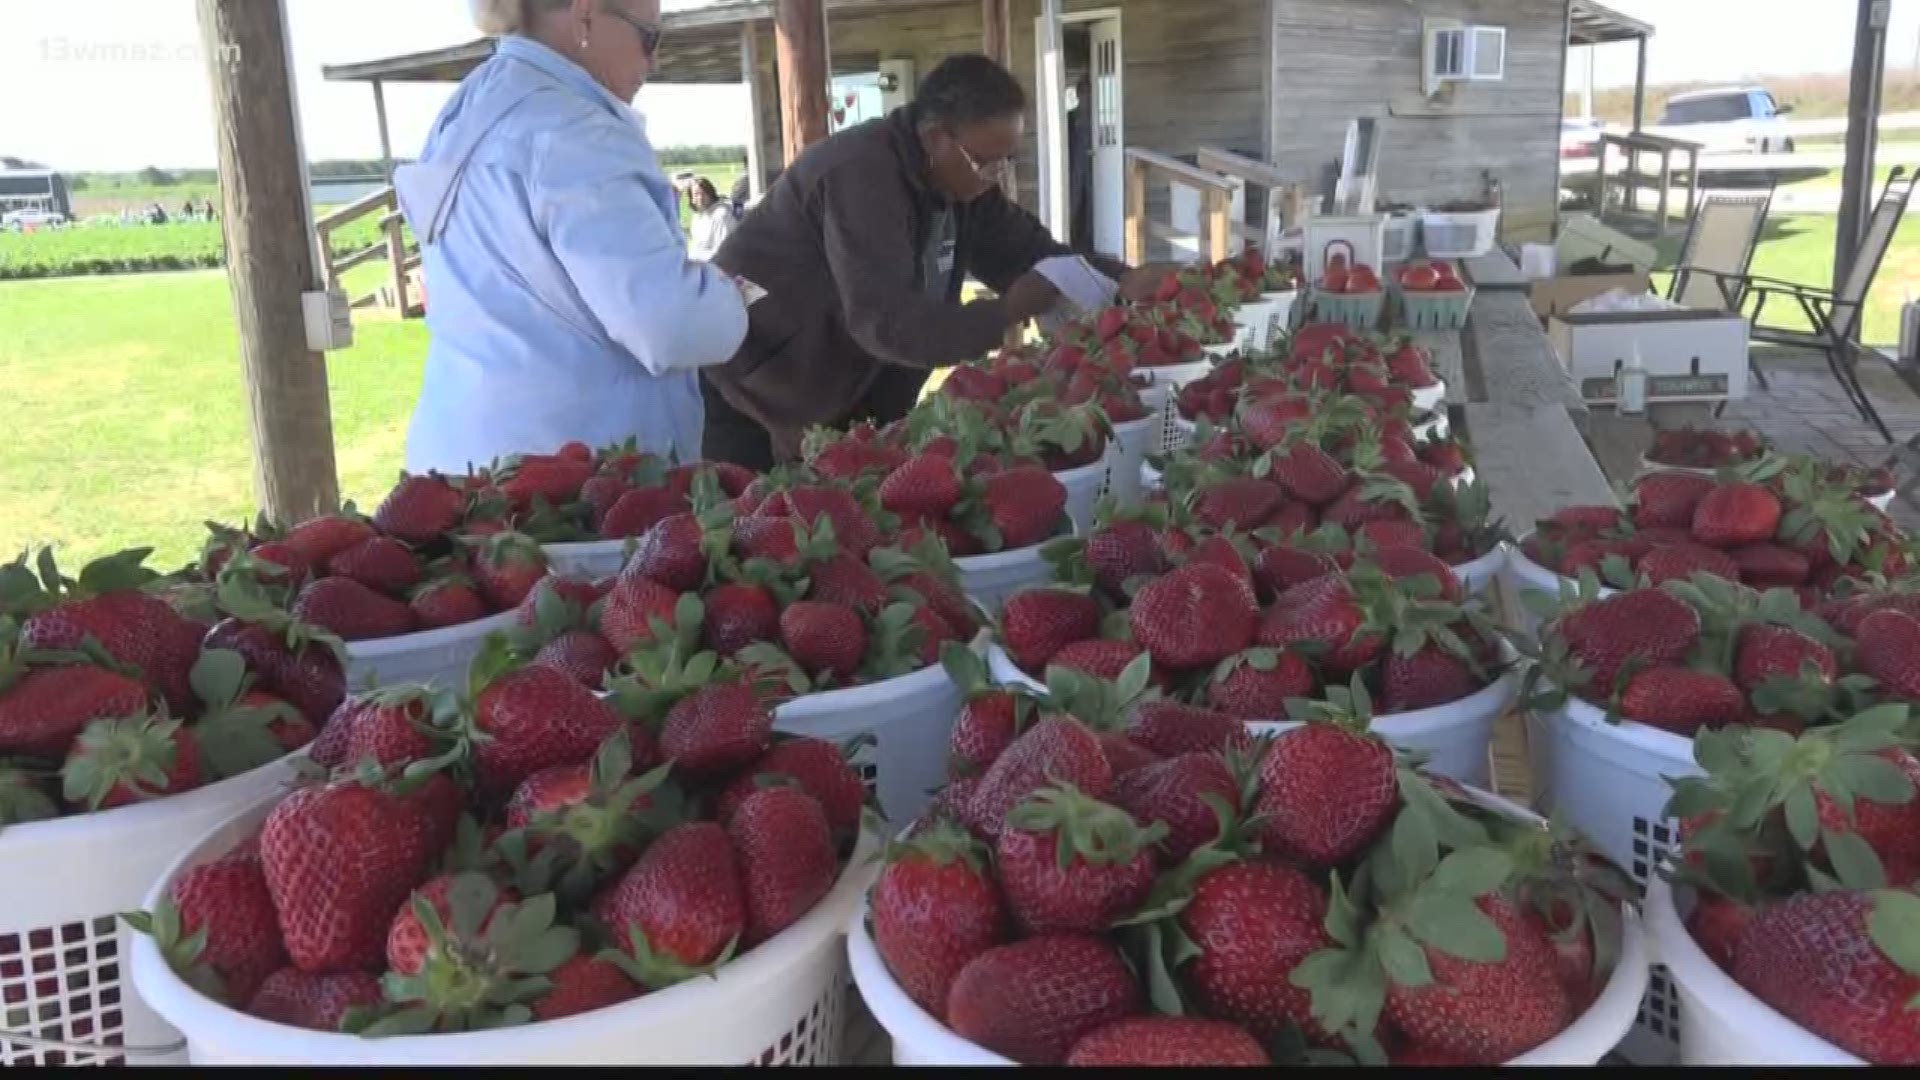 Strawberry Festival in Reynolds takes place April 27